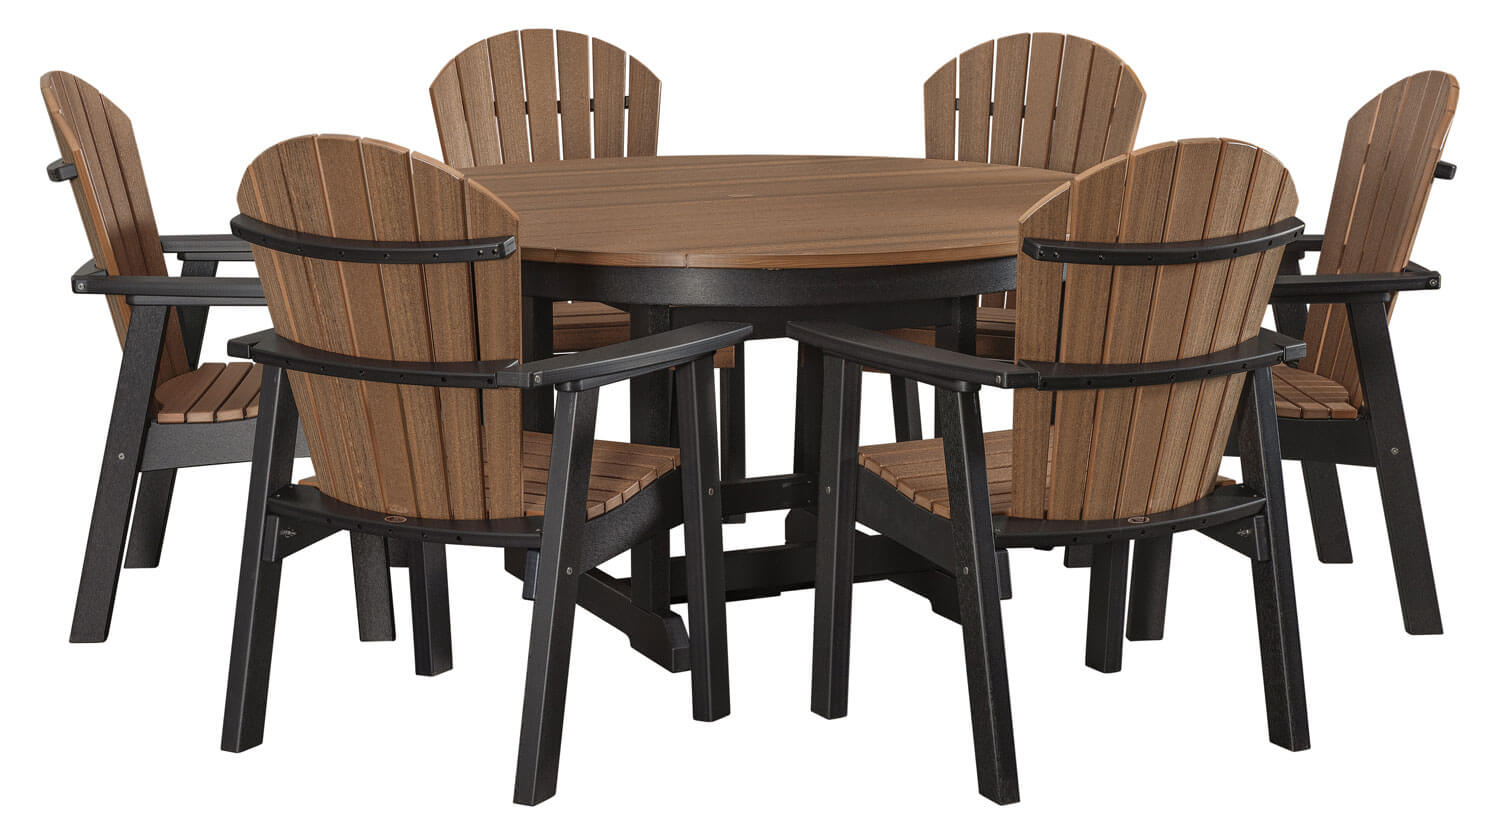 EC Woods Westbrook Outdoor Poly Dining Height Furniture Set Shown in Antique Mahogany and Black